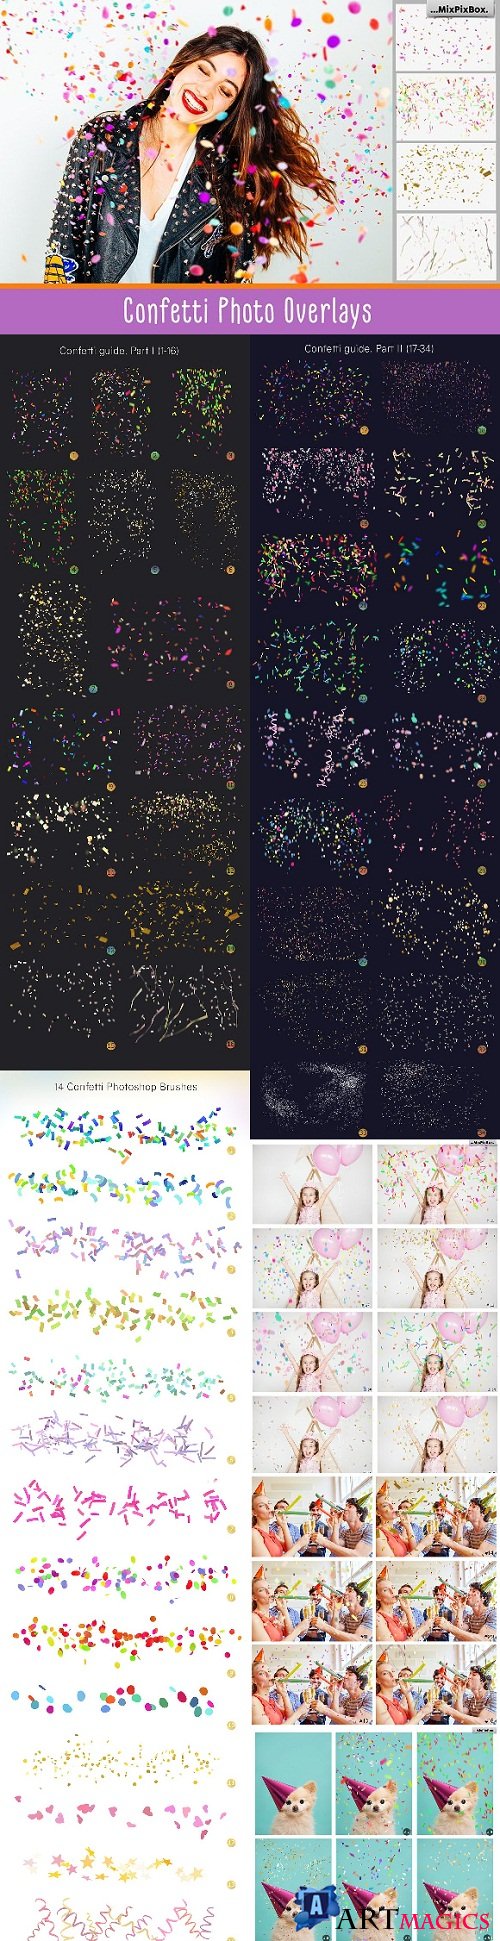 Confetti overlays + PS brushes 1571697